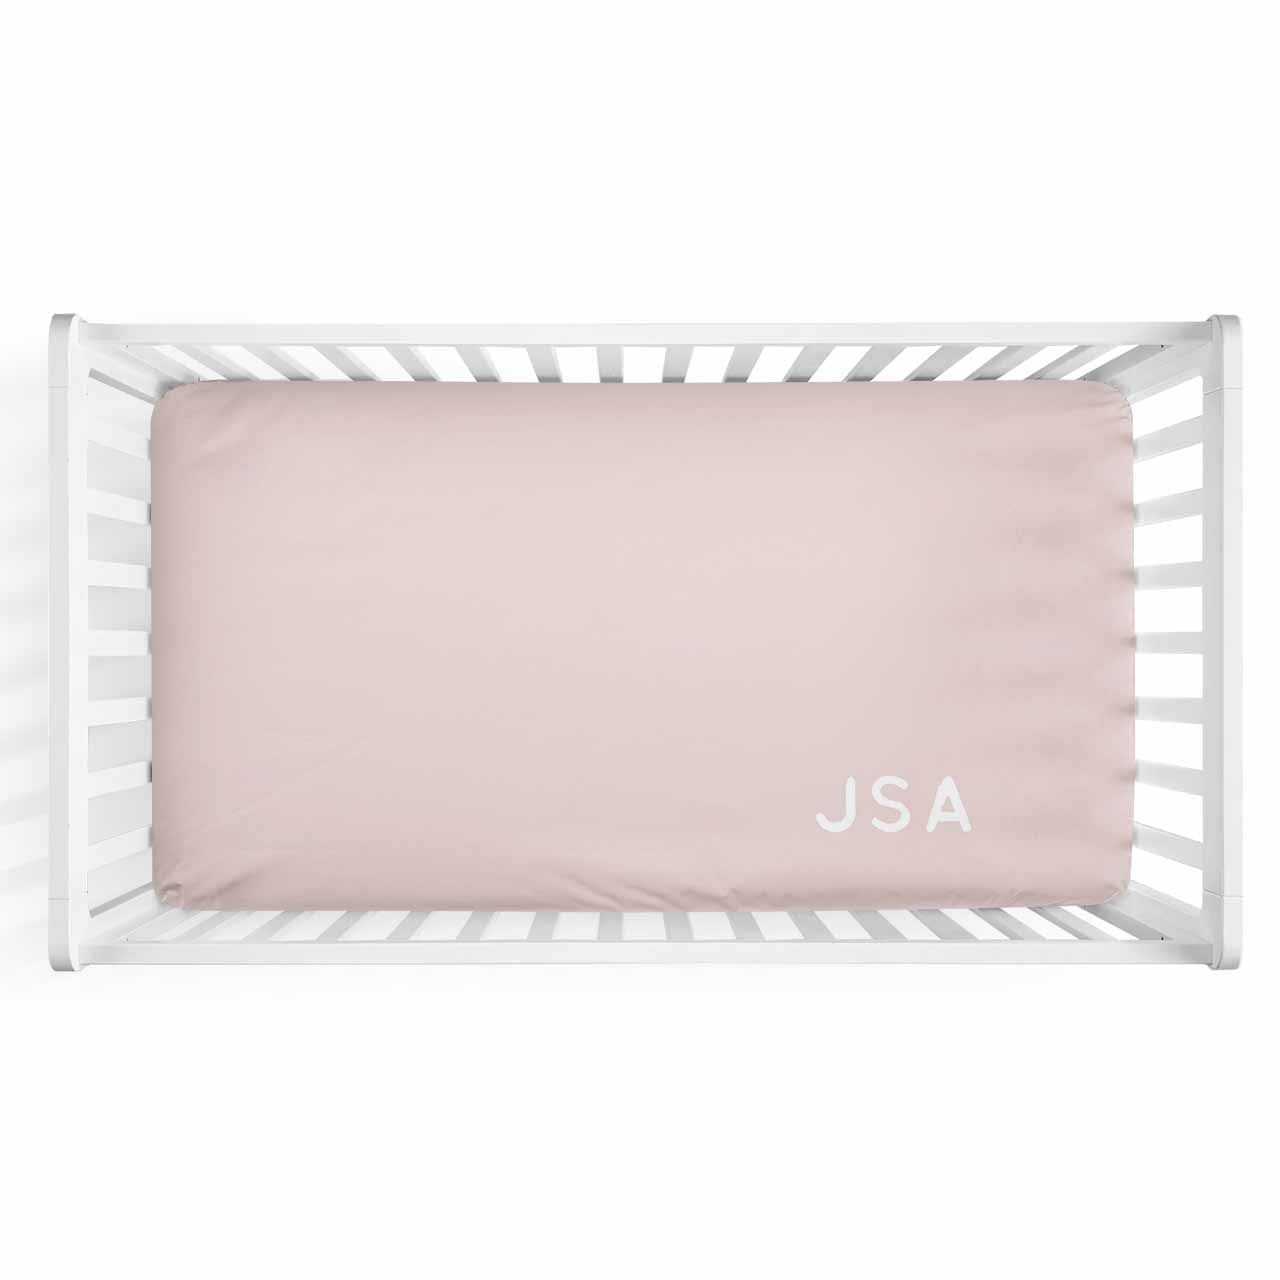 Personalized Baby Name Blush Color Jersey Knit Crib Sheet in Corner Initials Style